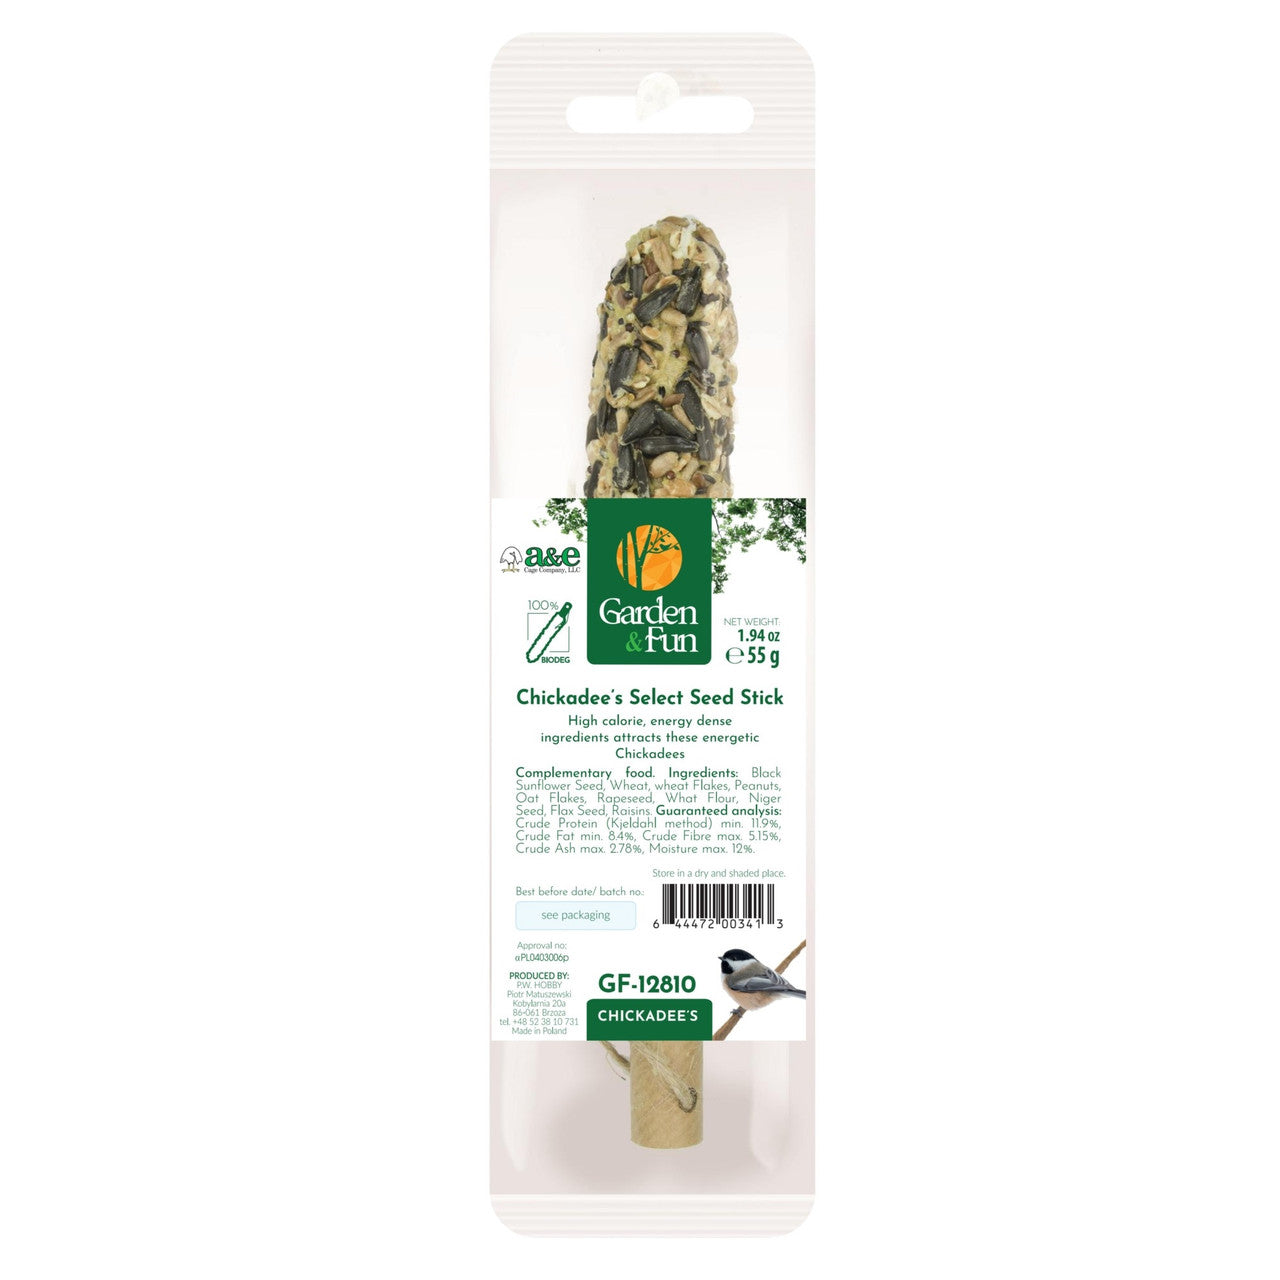 A & E Cage Company - Smakers Food Stick for Birds & Squirrels